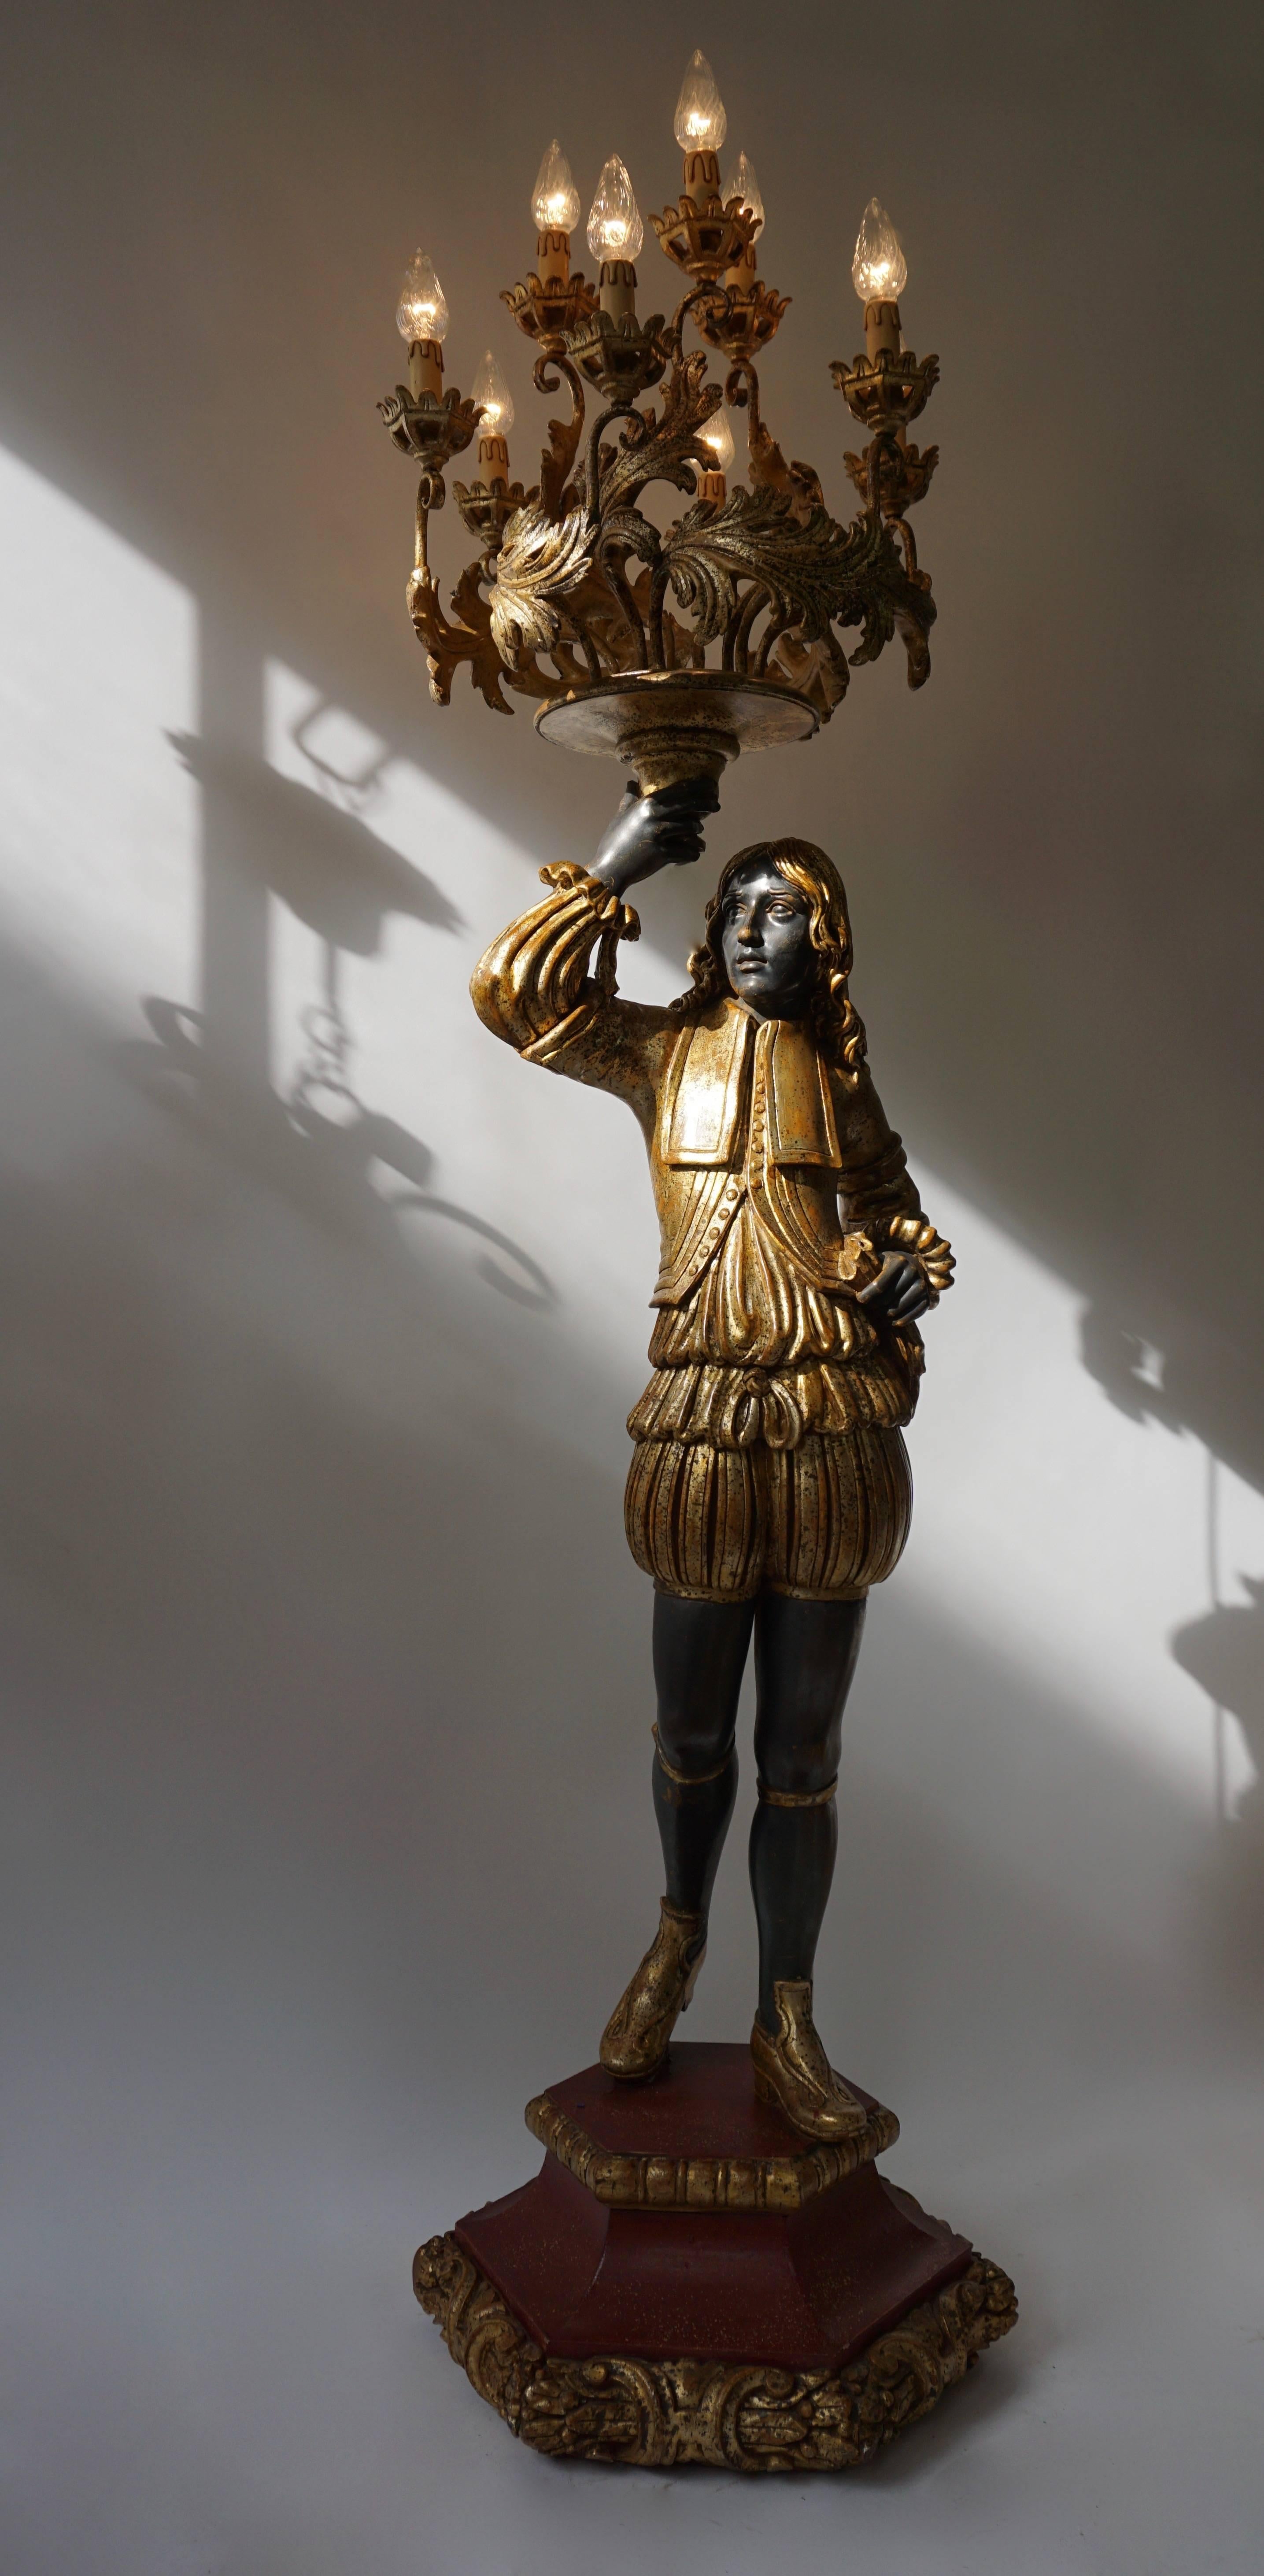 20th Century Hand-Painted and Gilded Venetian Candelabra Floor Lamp